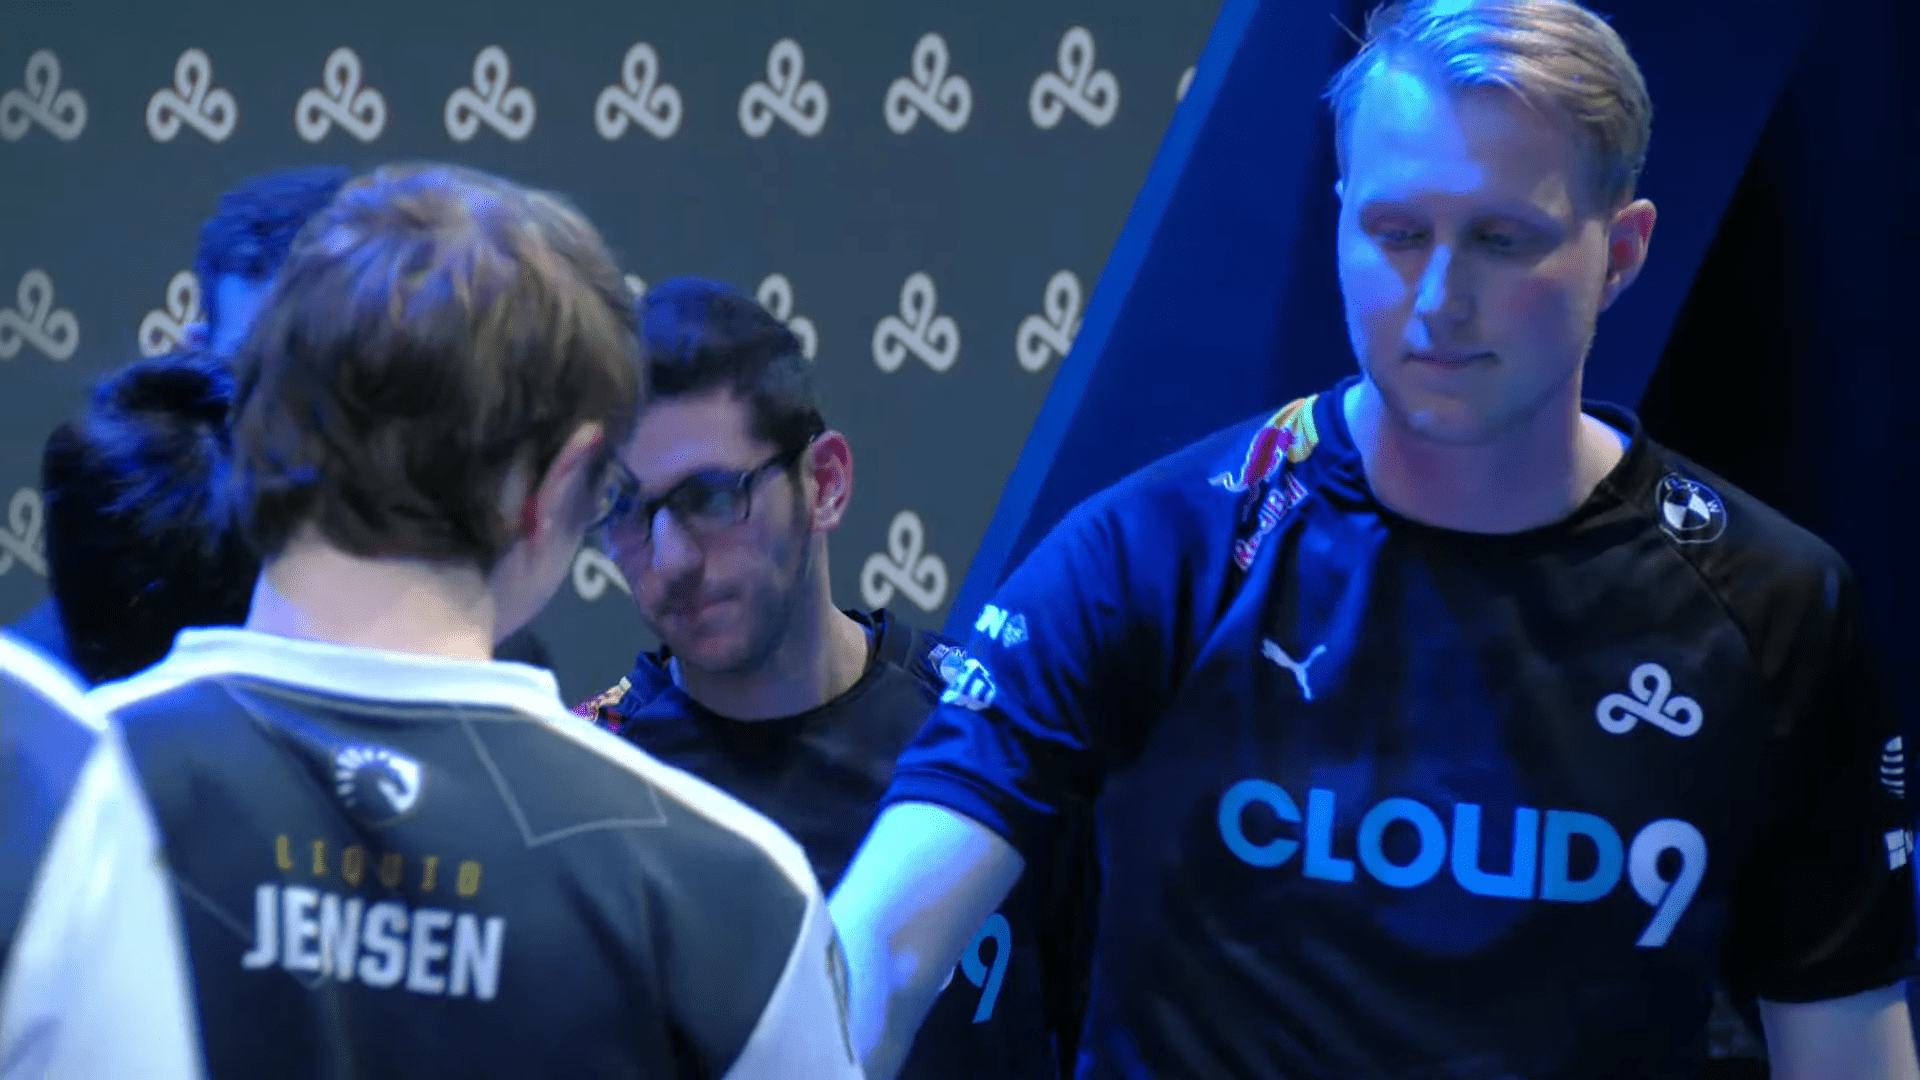 Zven, Cloud 9 Latest Acquisition, Is The Leading Attack Damage Carry Player In The League